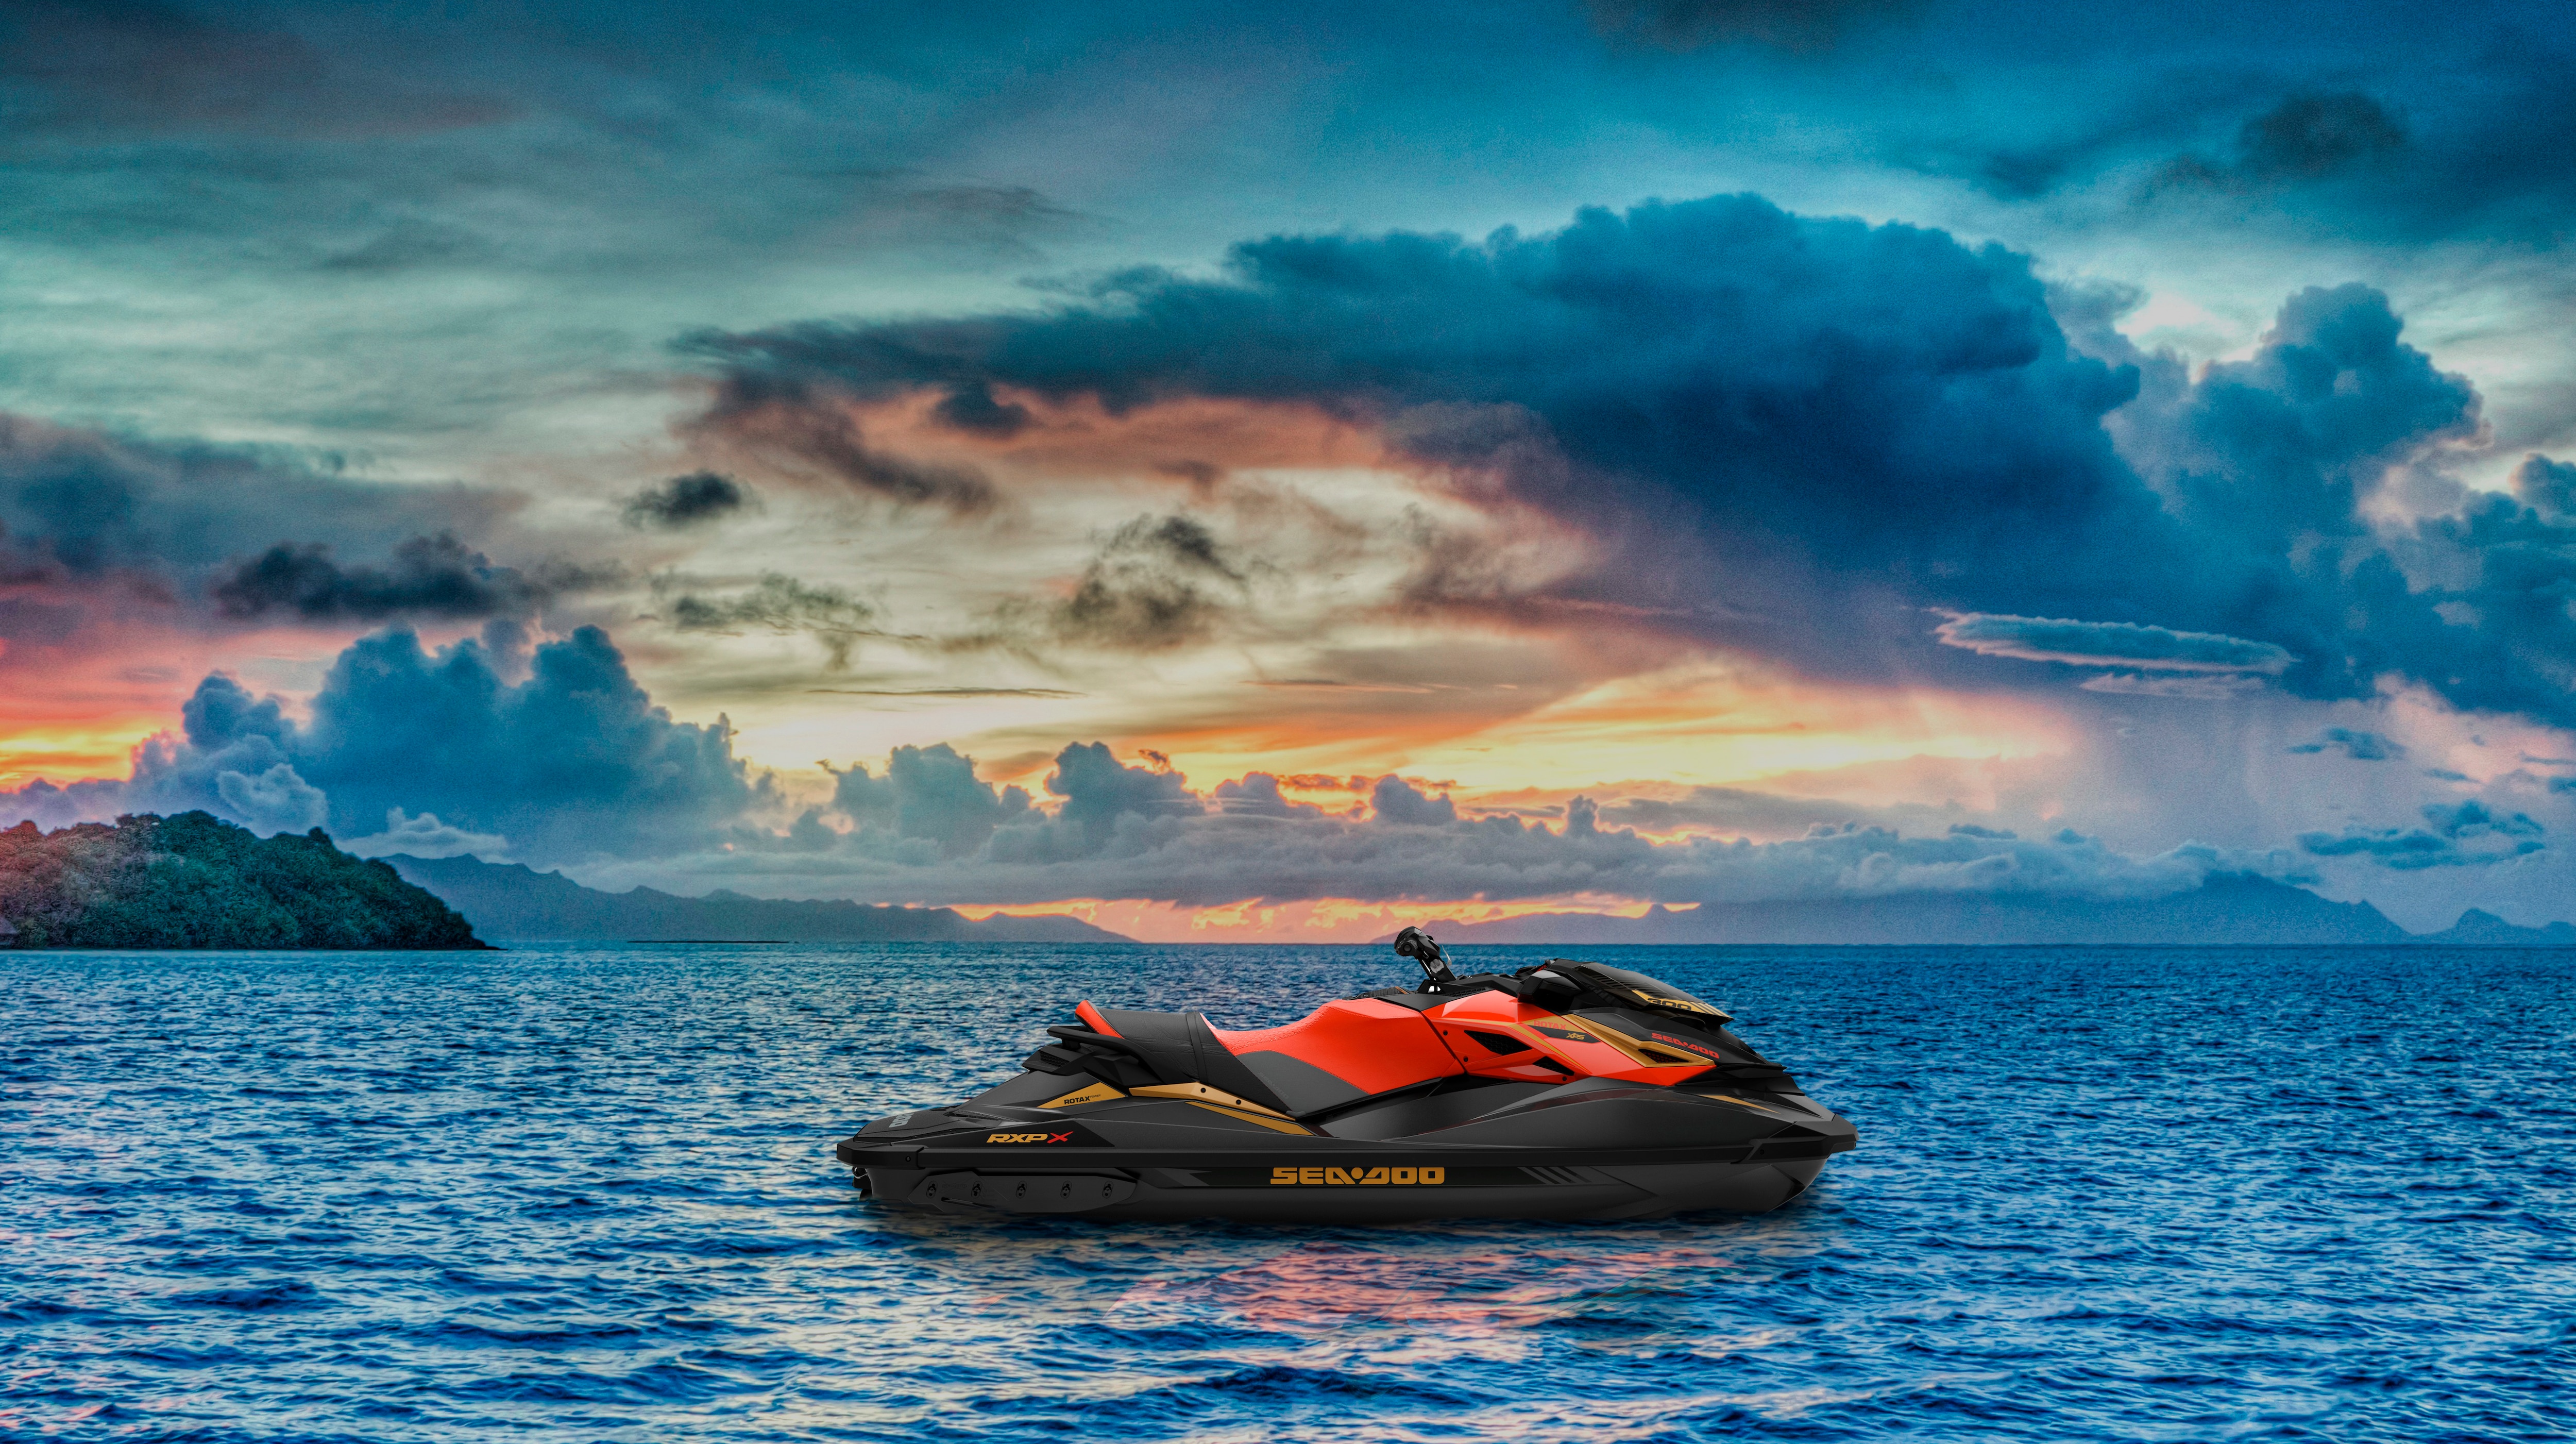 Scenic landscape of a parked Sea-Doo RXP